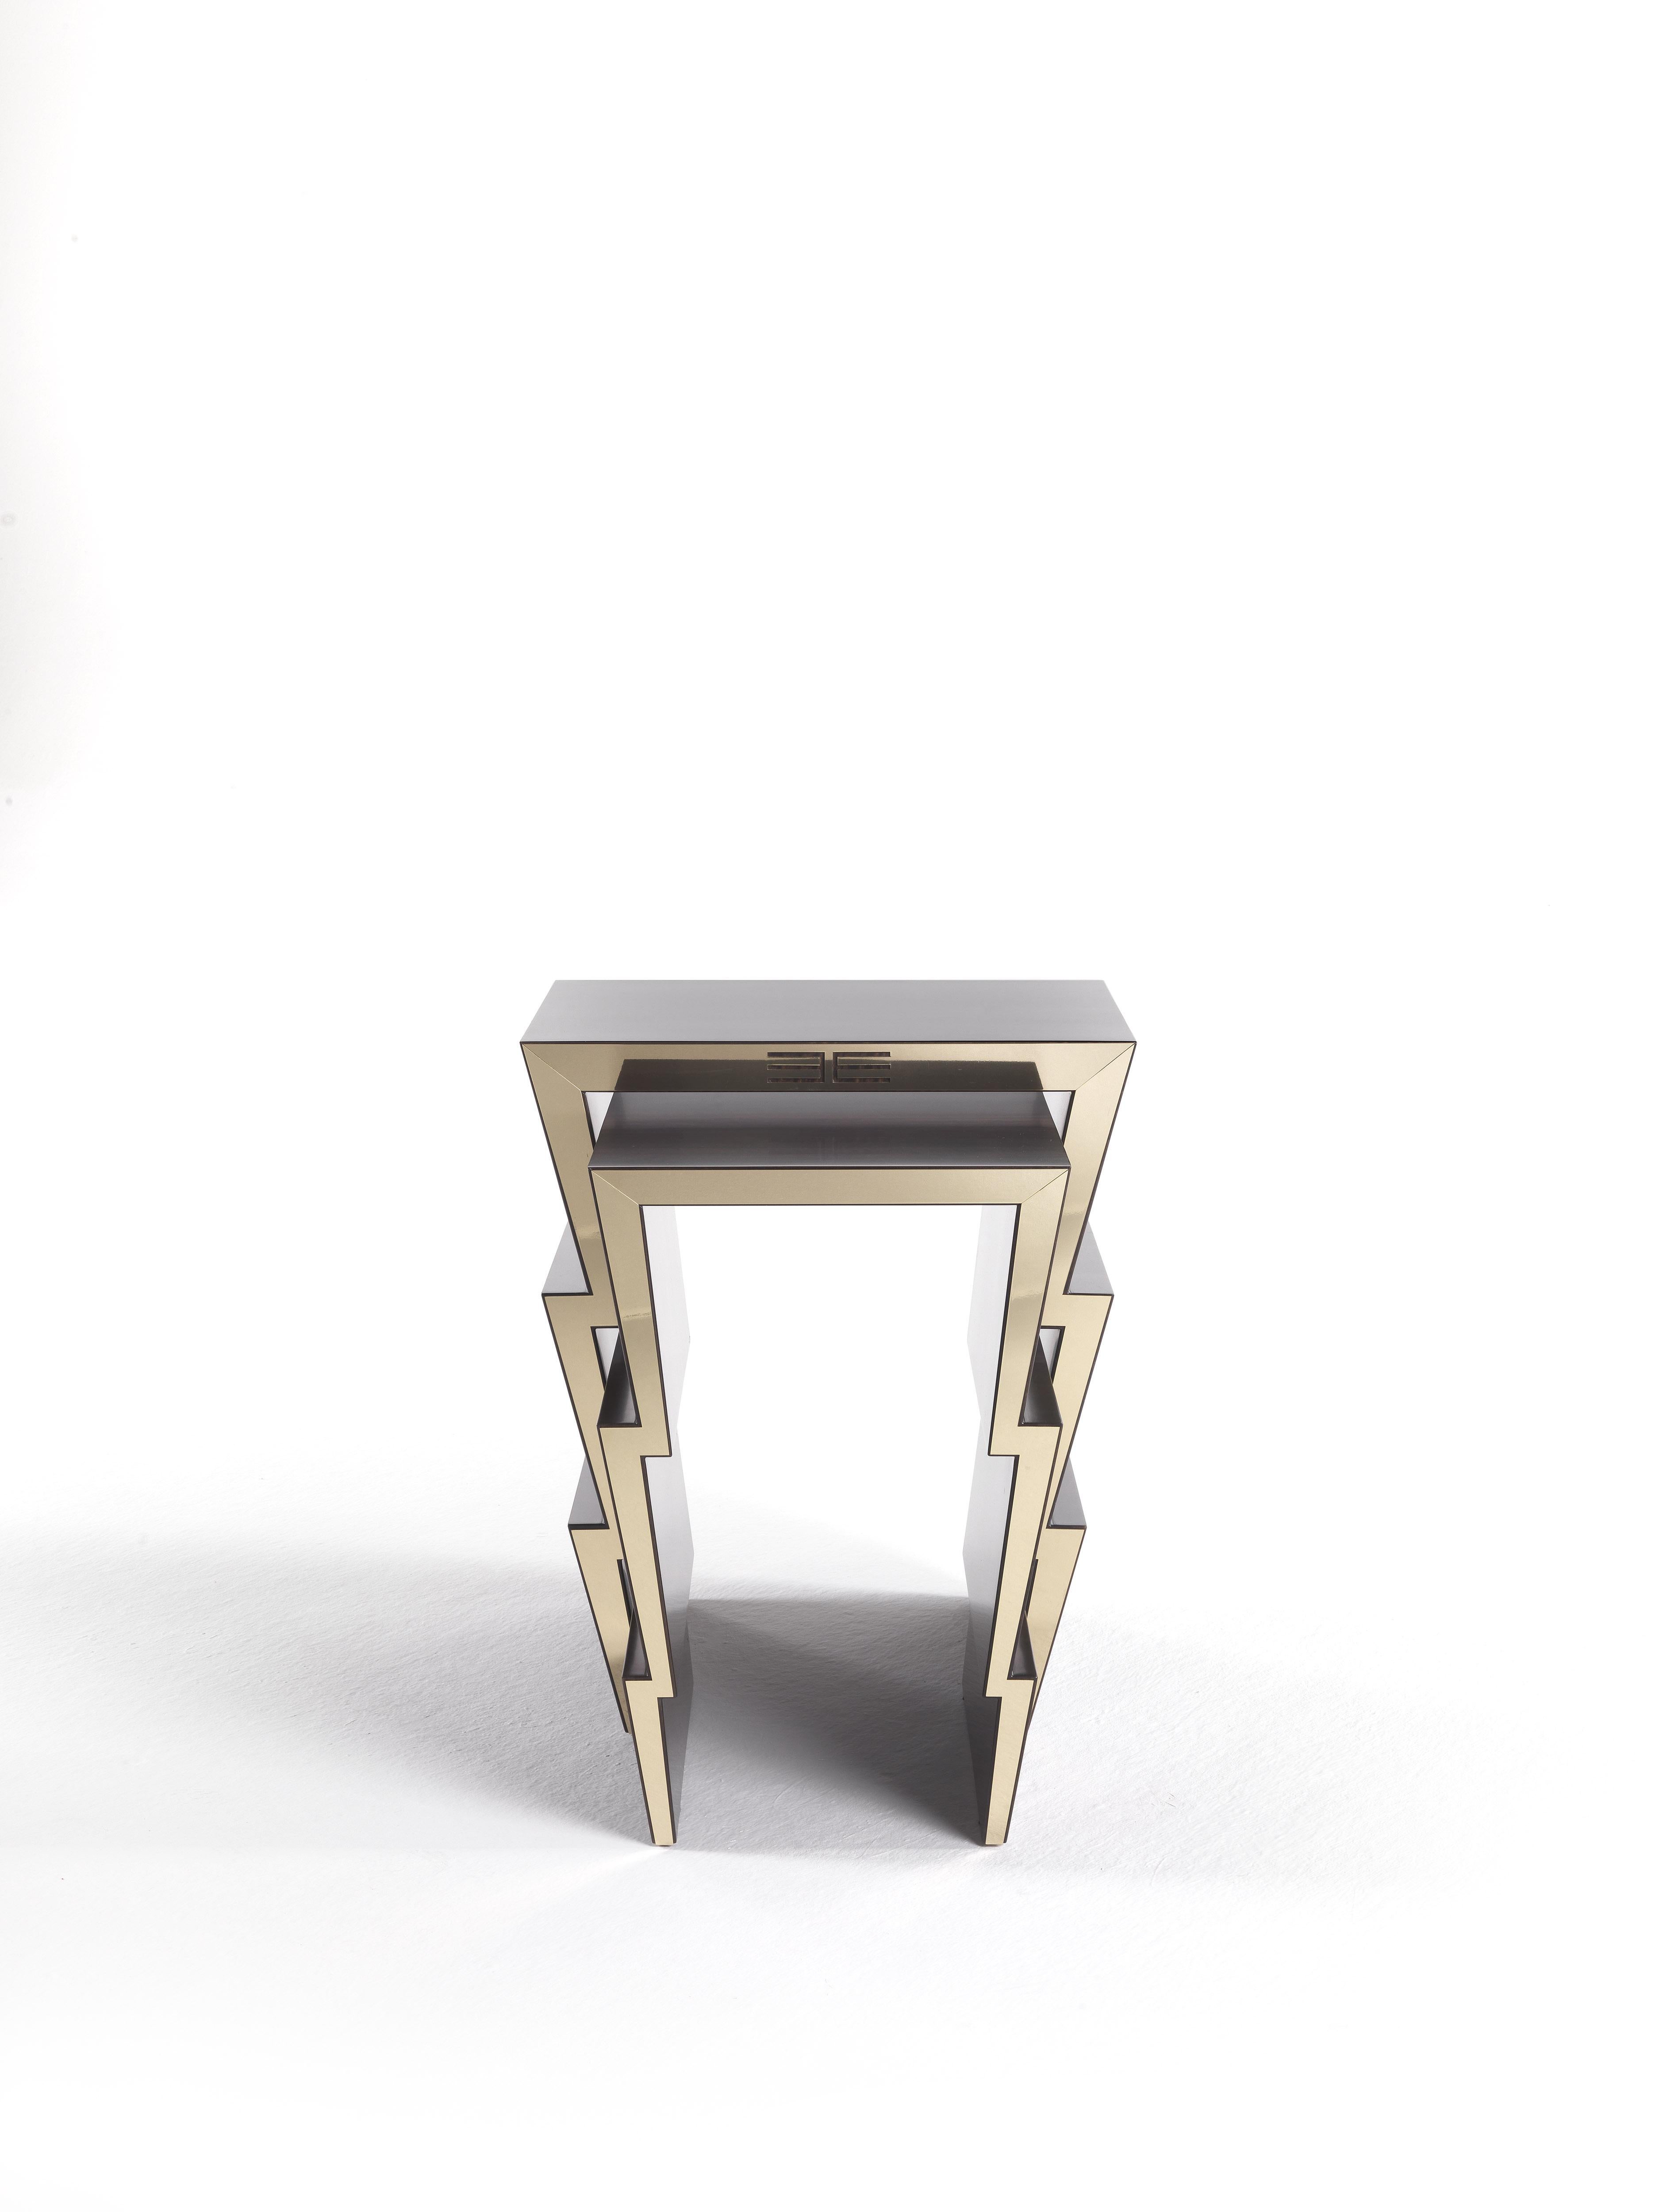 Made in smoked frisé eucalyptus wood, the Ziggy side table is supported by legs recalling the zigzag shape of the thunderbolts. The mythological inspiration, one of the dominant themes in the 2019 collection, is expressed in this case in an element